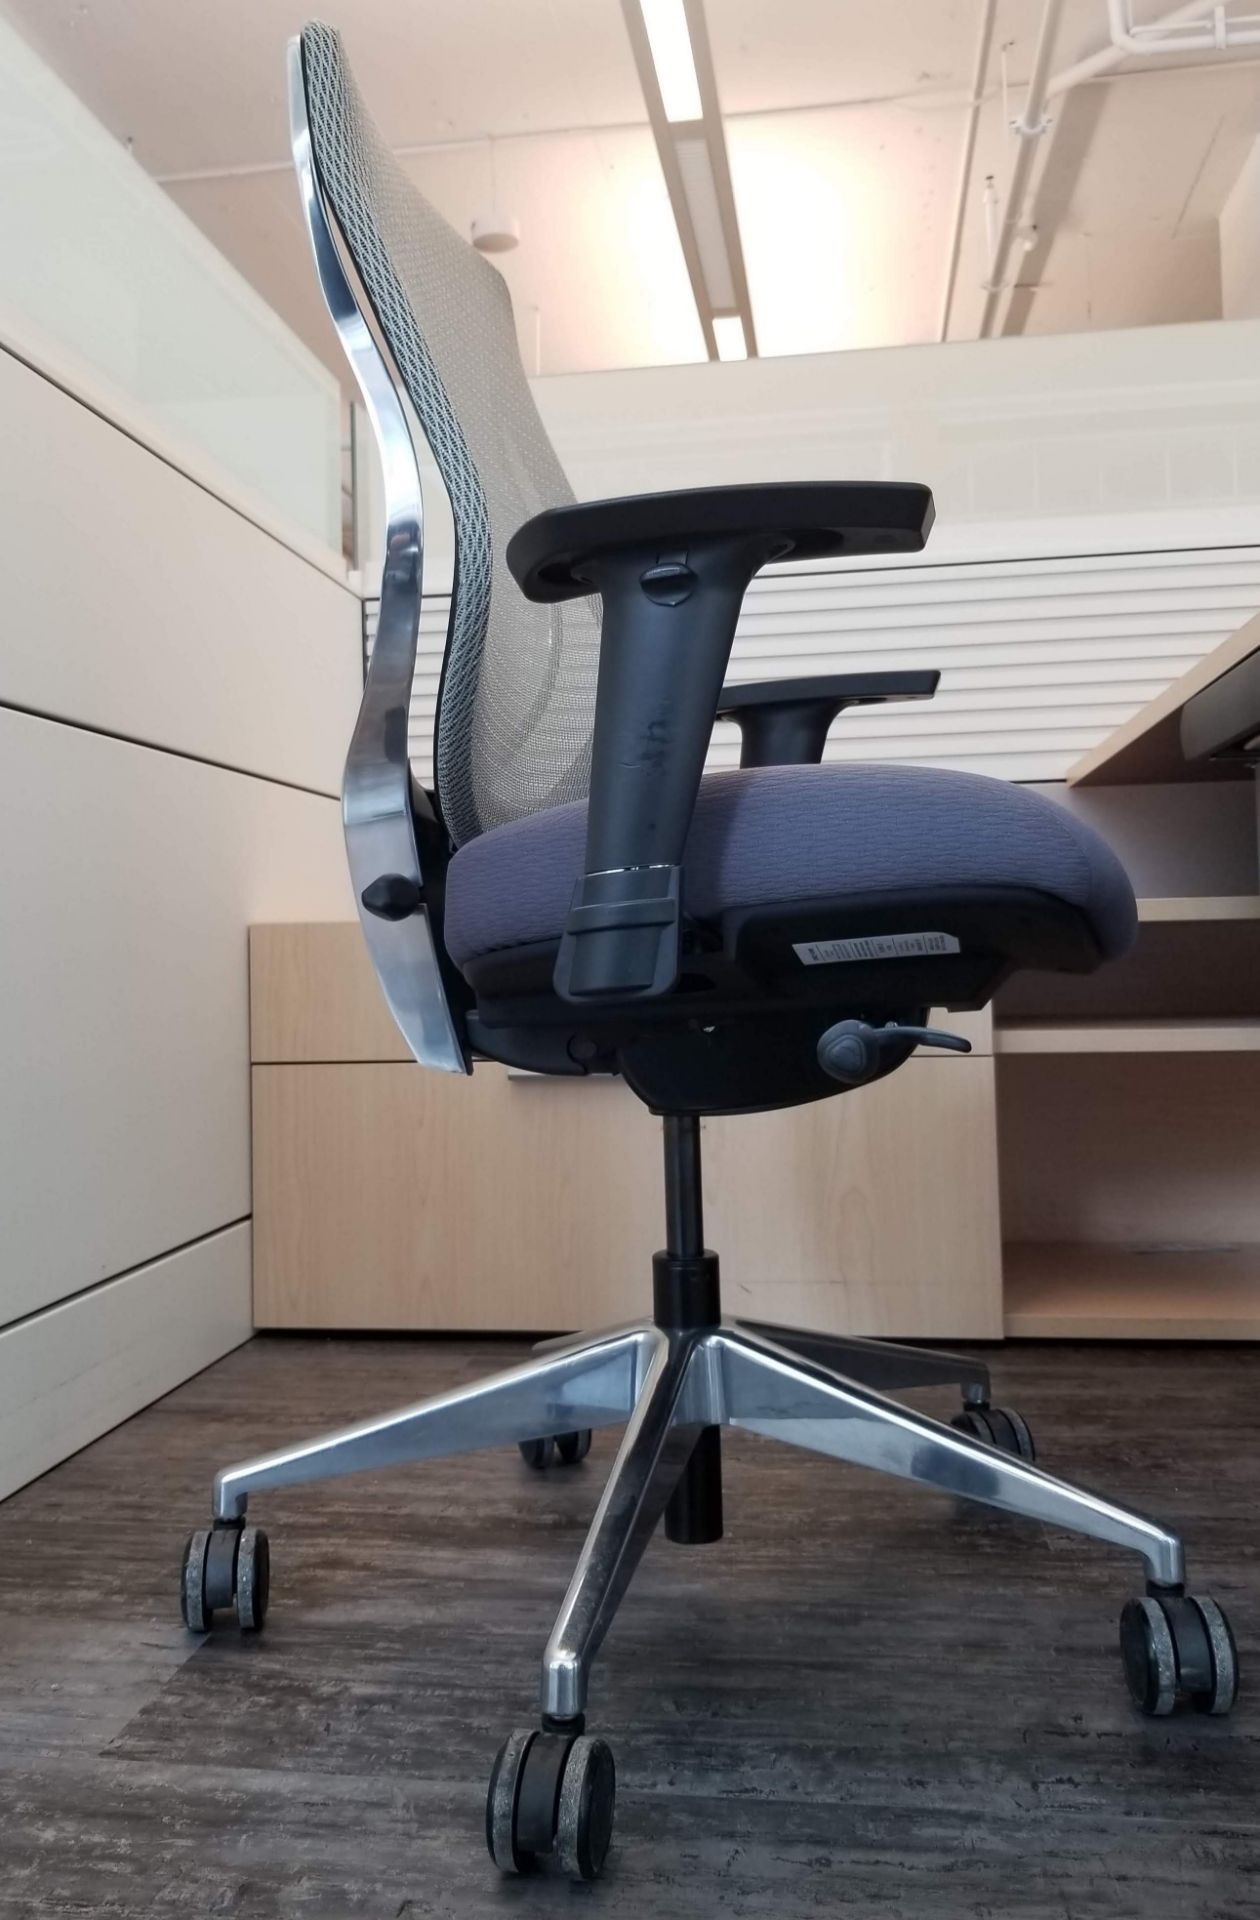 ALLSEATING - EXEC. CHAIR ON CASTERS, GREY W/ MESH BACK, ADJUSTABLE HEIGHT, ADJUSTABLE ARMS - Image 2 of 6